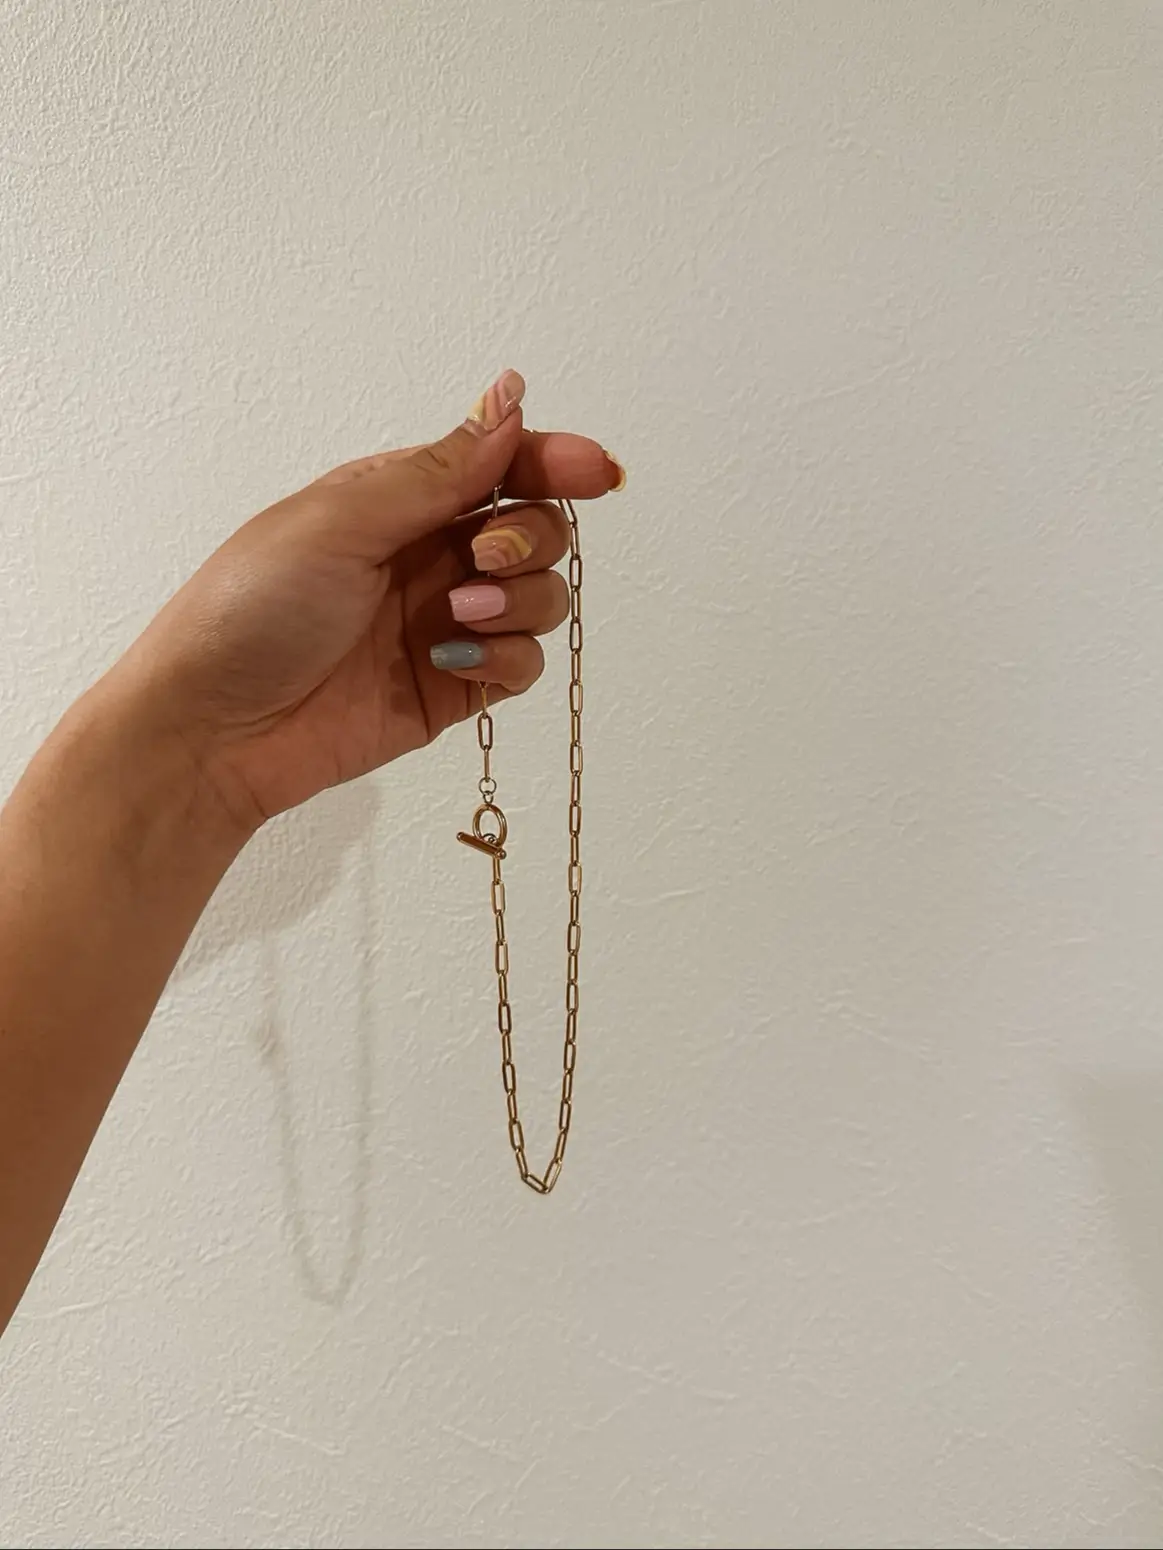 After all, the surgical stainless ⛓️🌞 gold necklace looks